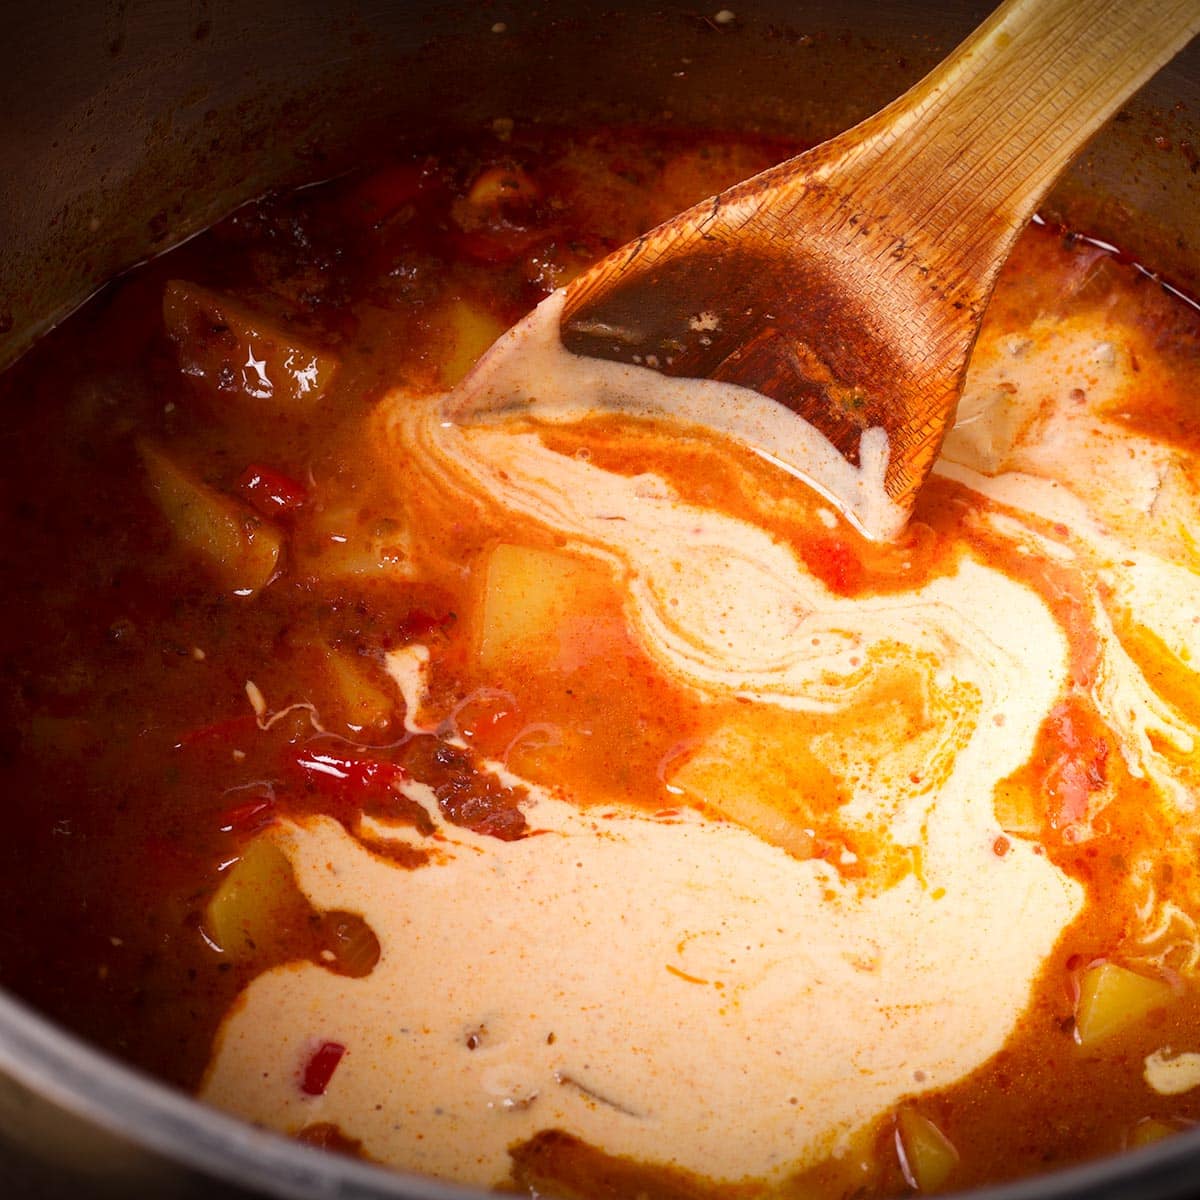 Pour the sour cream and broth mixture back into the soup pot and stir to mix everything together.